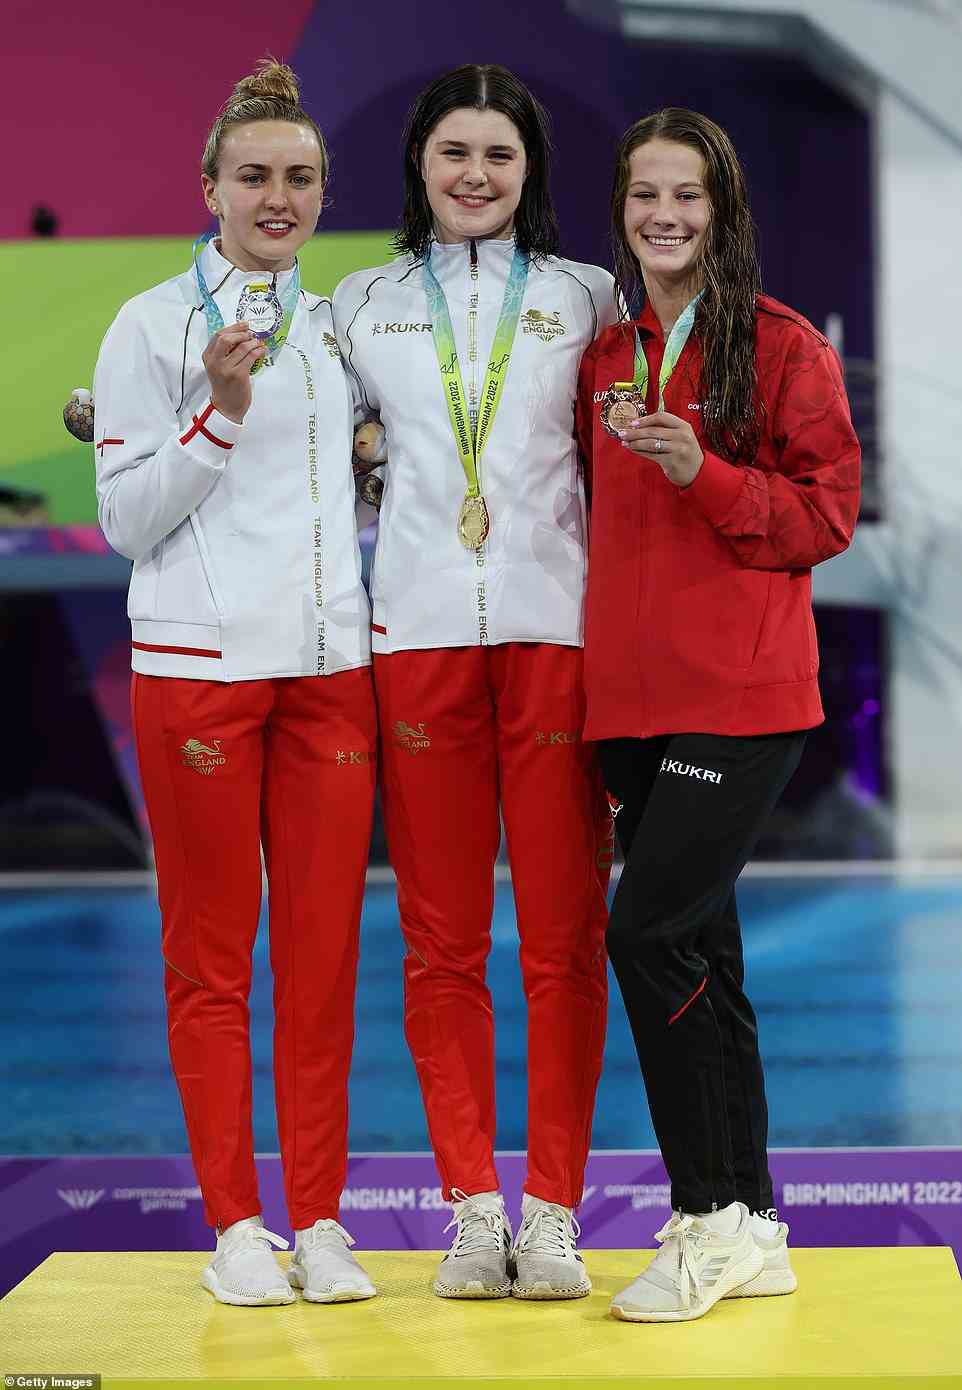 Well done: Andrea was joined by silver medallist and teammate Lois and Canadian bronze medallist Caeli Sierra McKay as they posed with their medals